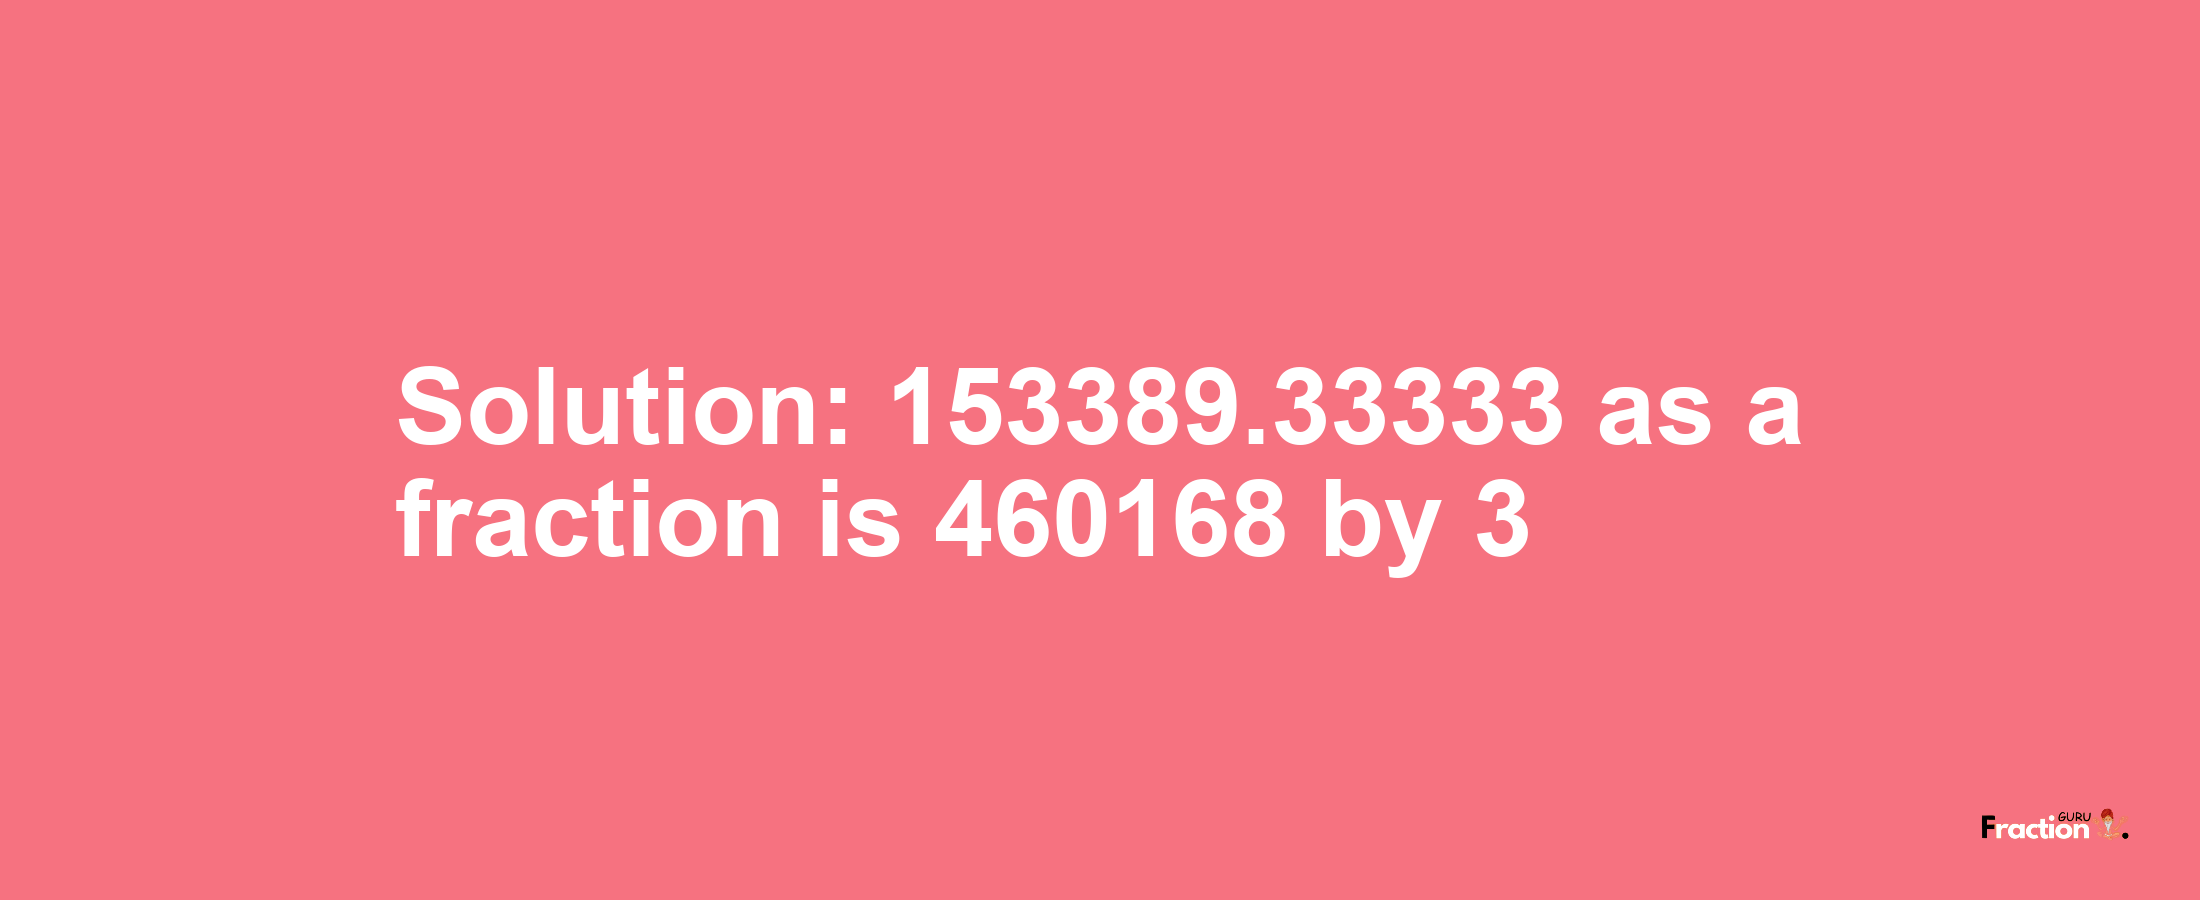 Solution:153389.33333 as a fraction is 460168/3